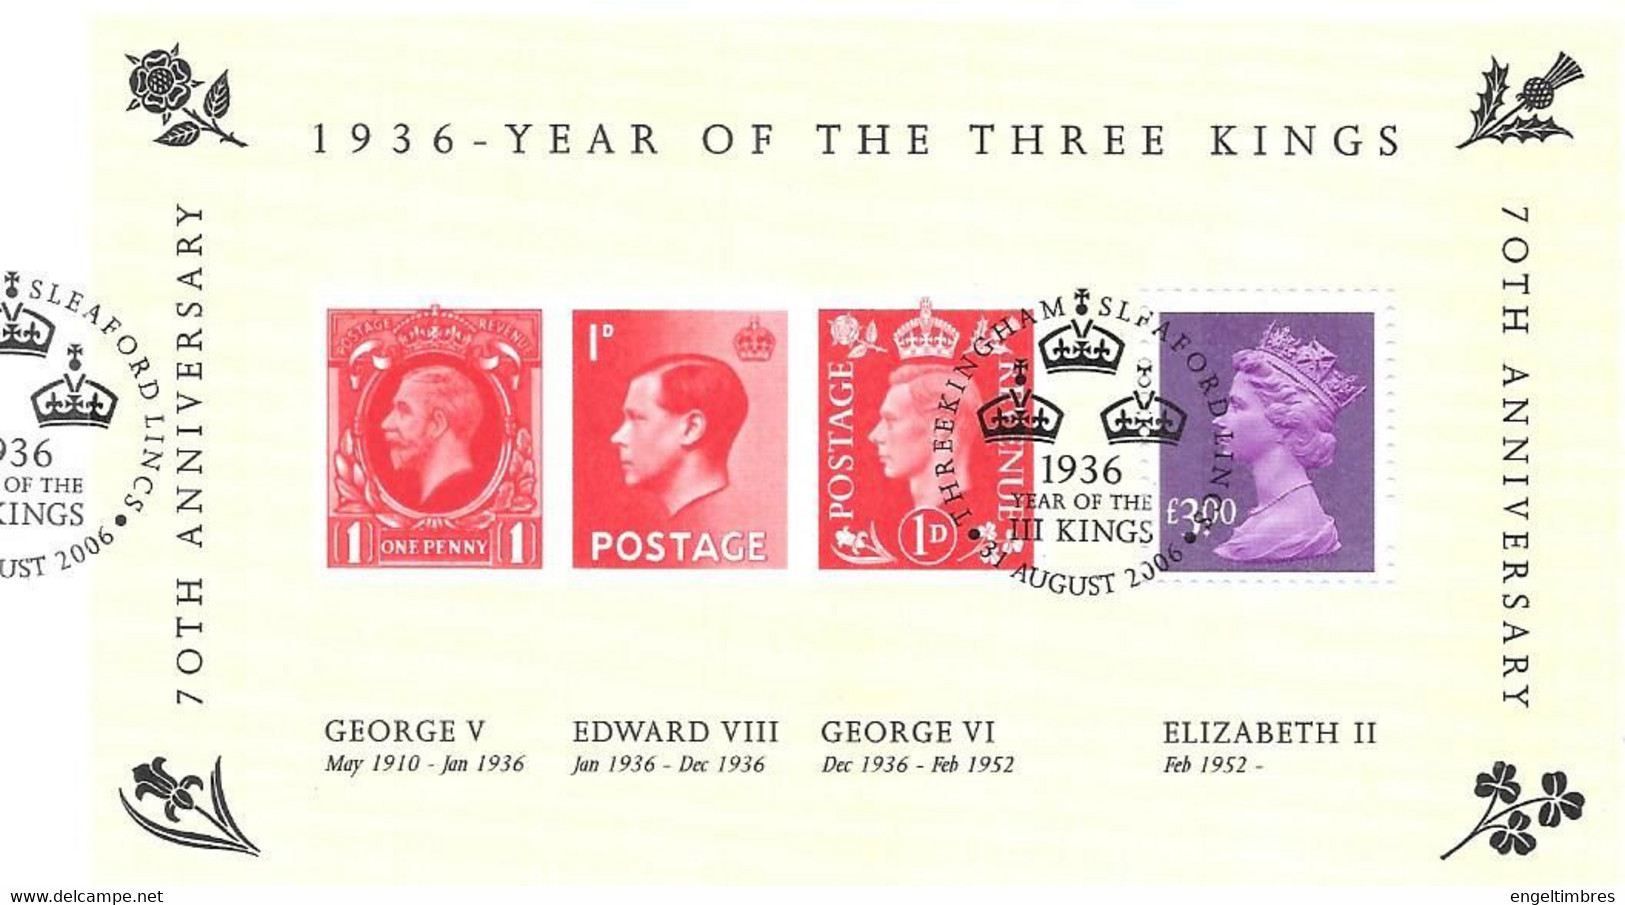 GB - 2006  Year Of THRERE KINGS  MINISHEET    FDC Or  USED  "ON PIECE" - SEE NOTES  And Scans - 2001-2010 Em. Décimales